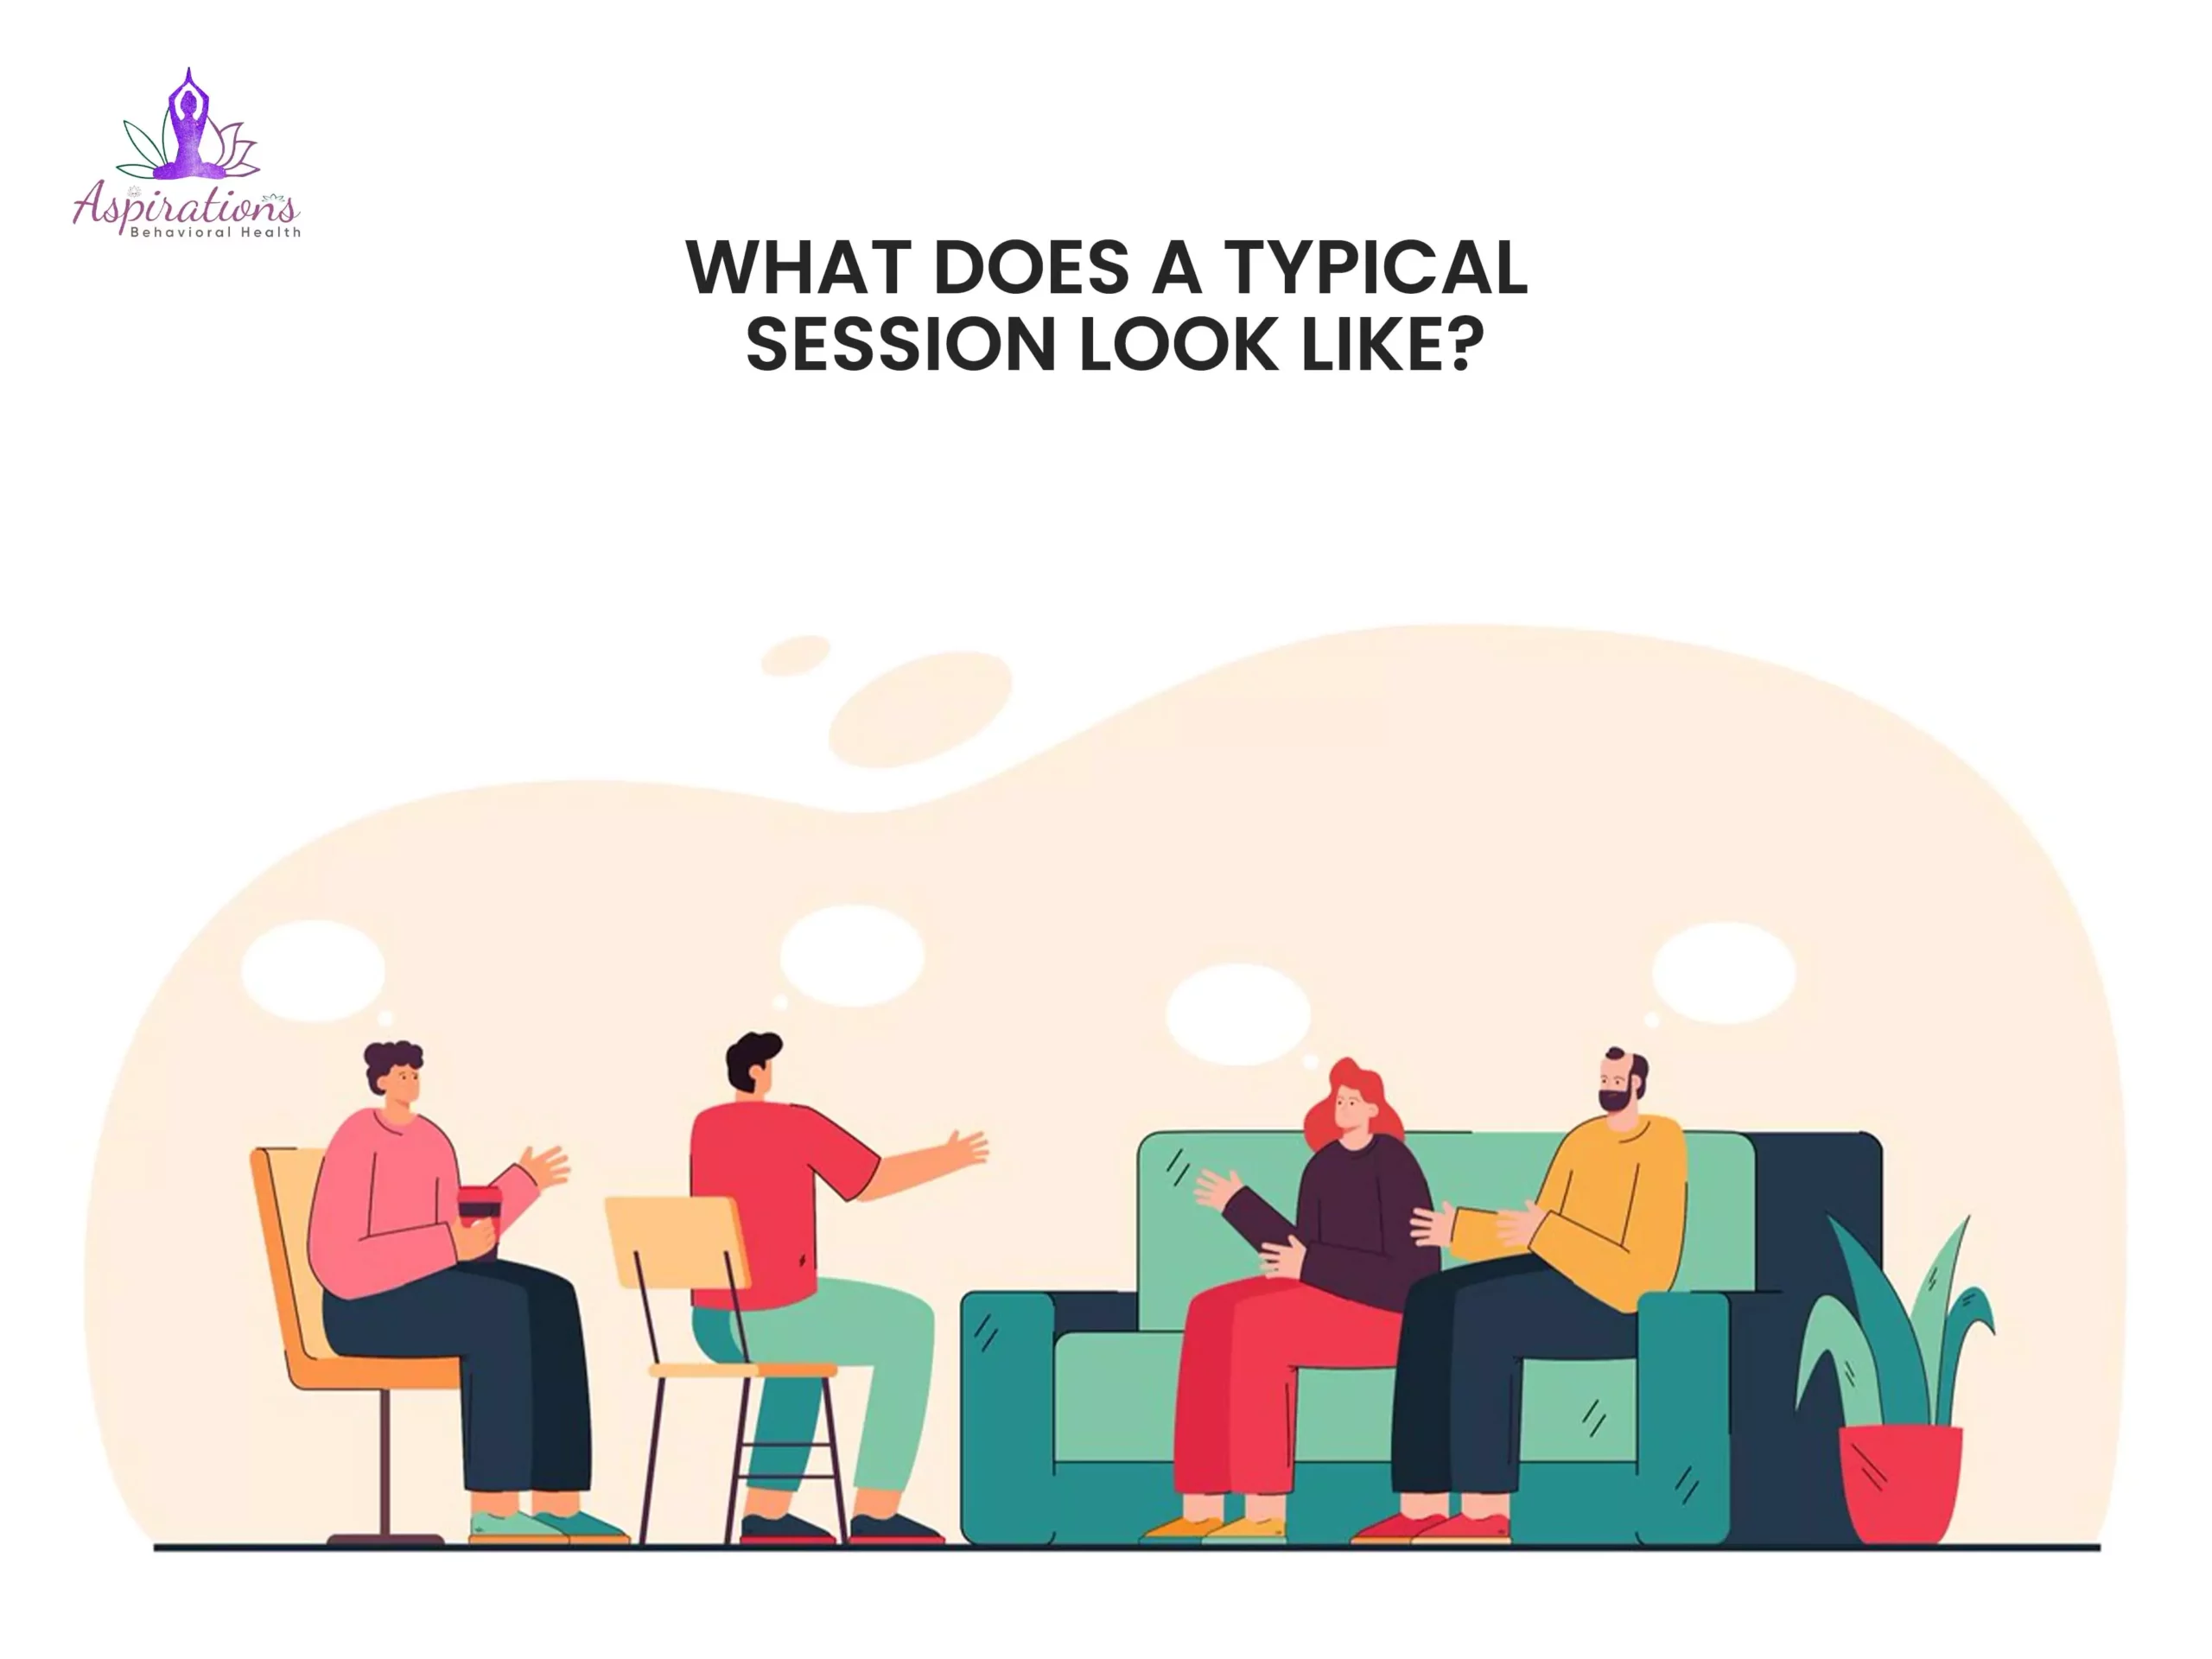 What Does a Typical Session Look Like?